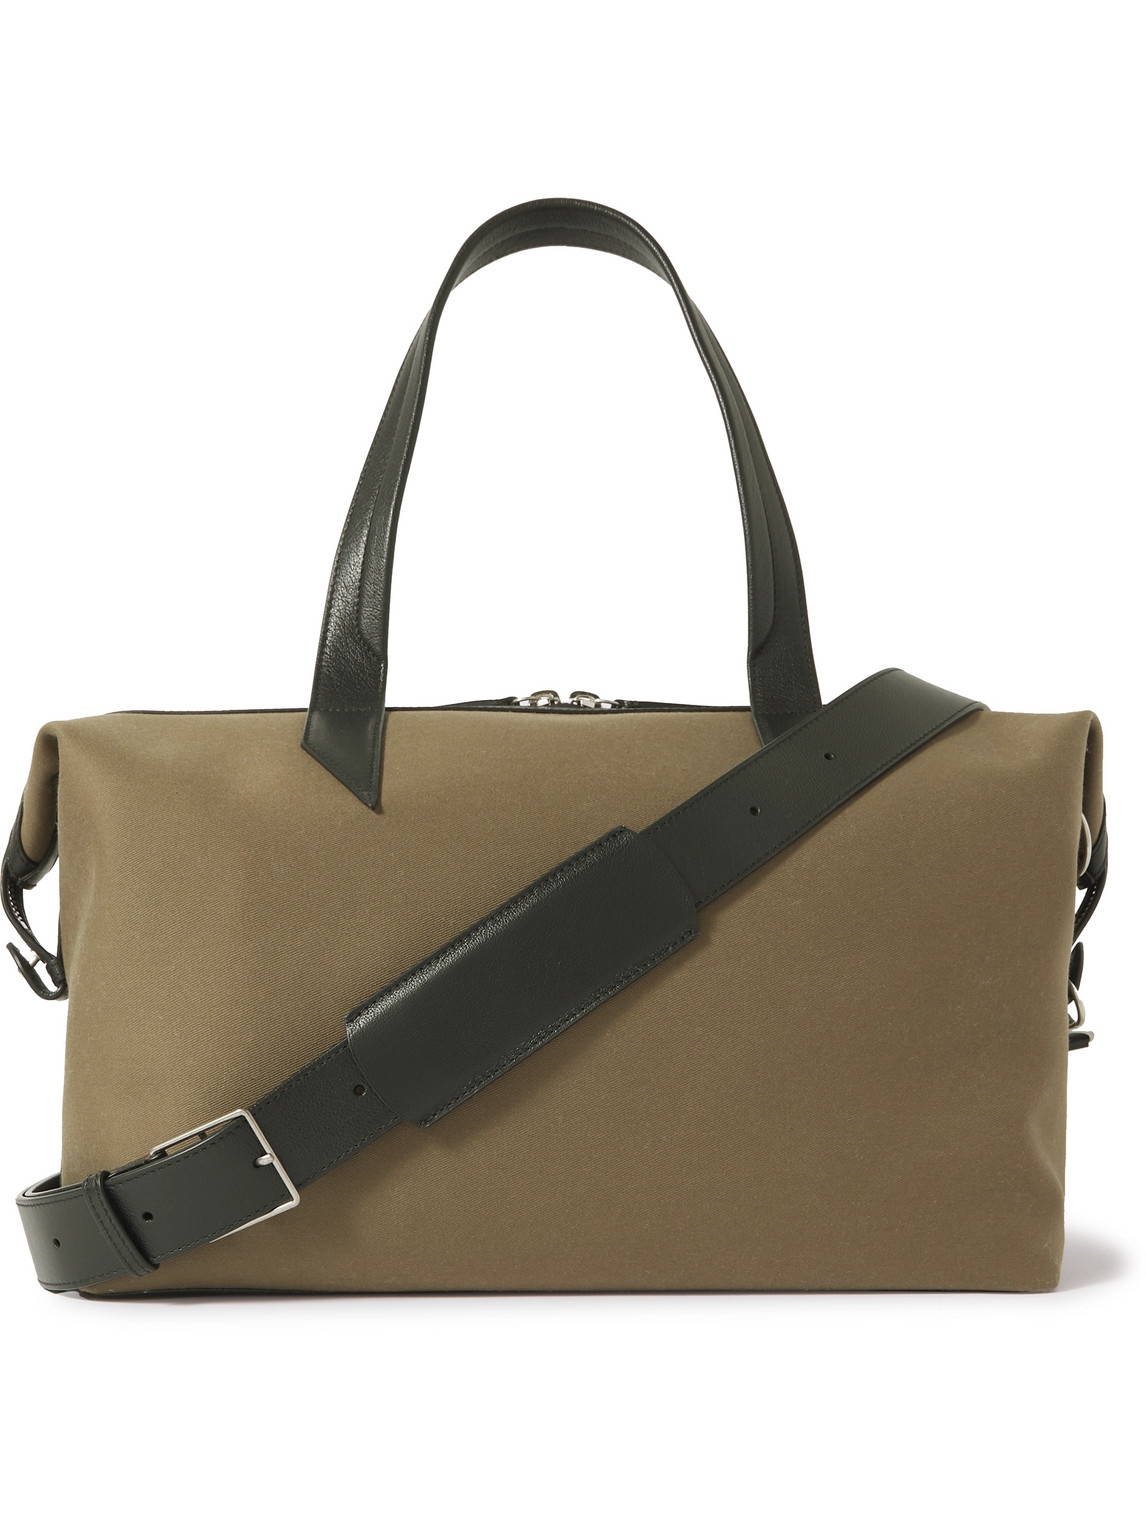 Métier - Nomad Leather-Trimmed Coated-Twill Weekend Bag - Men - Green - one size